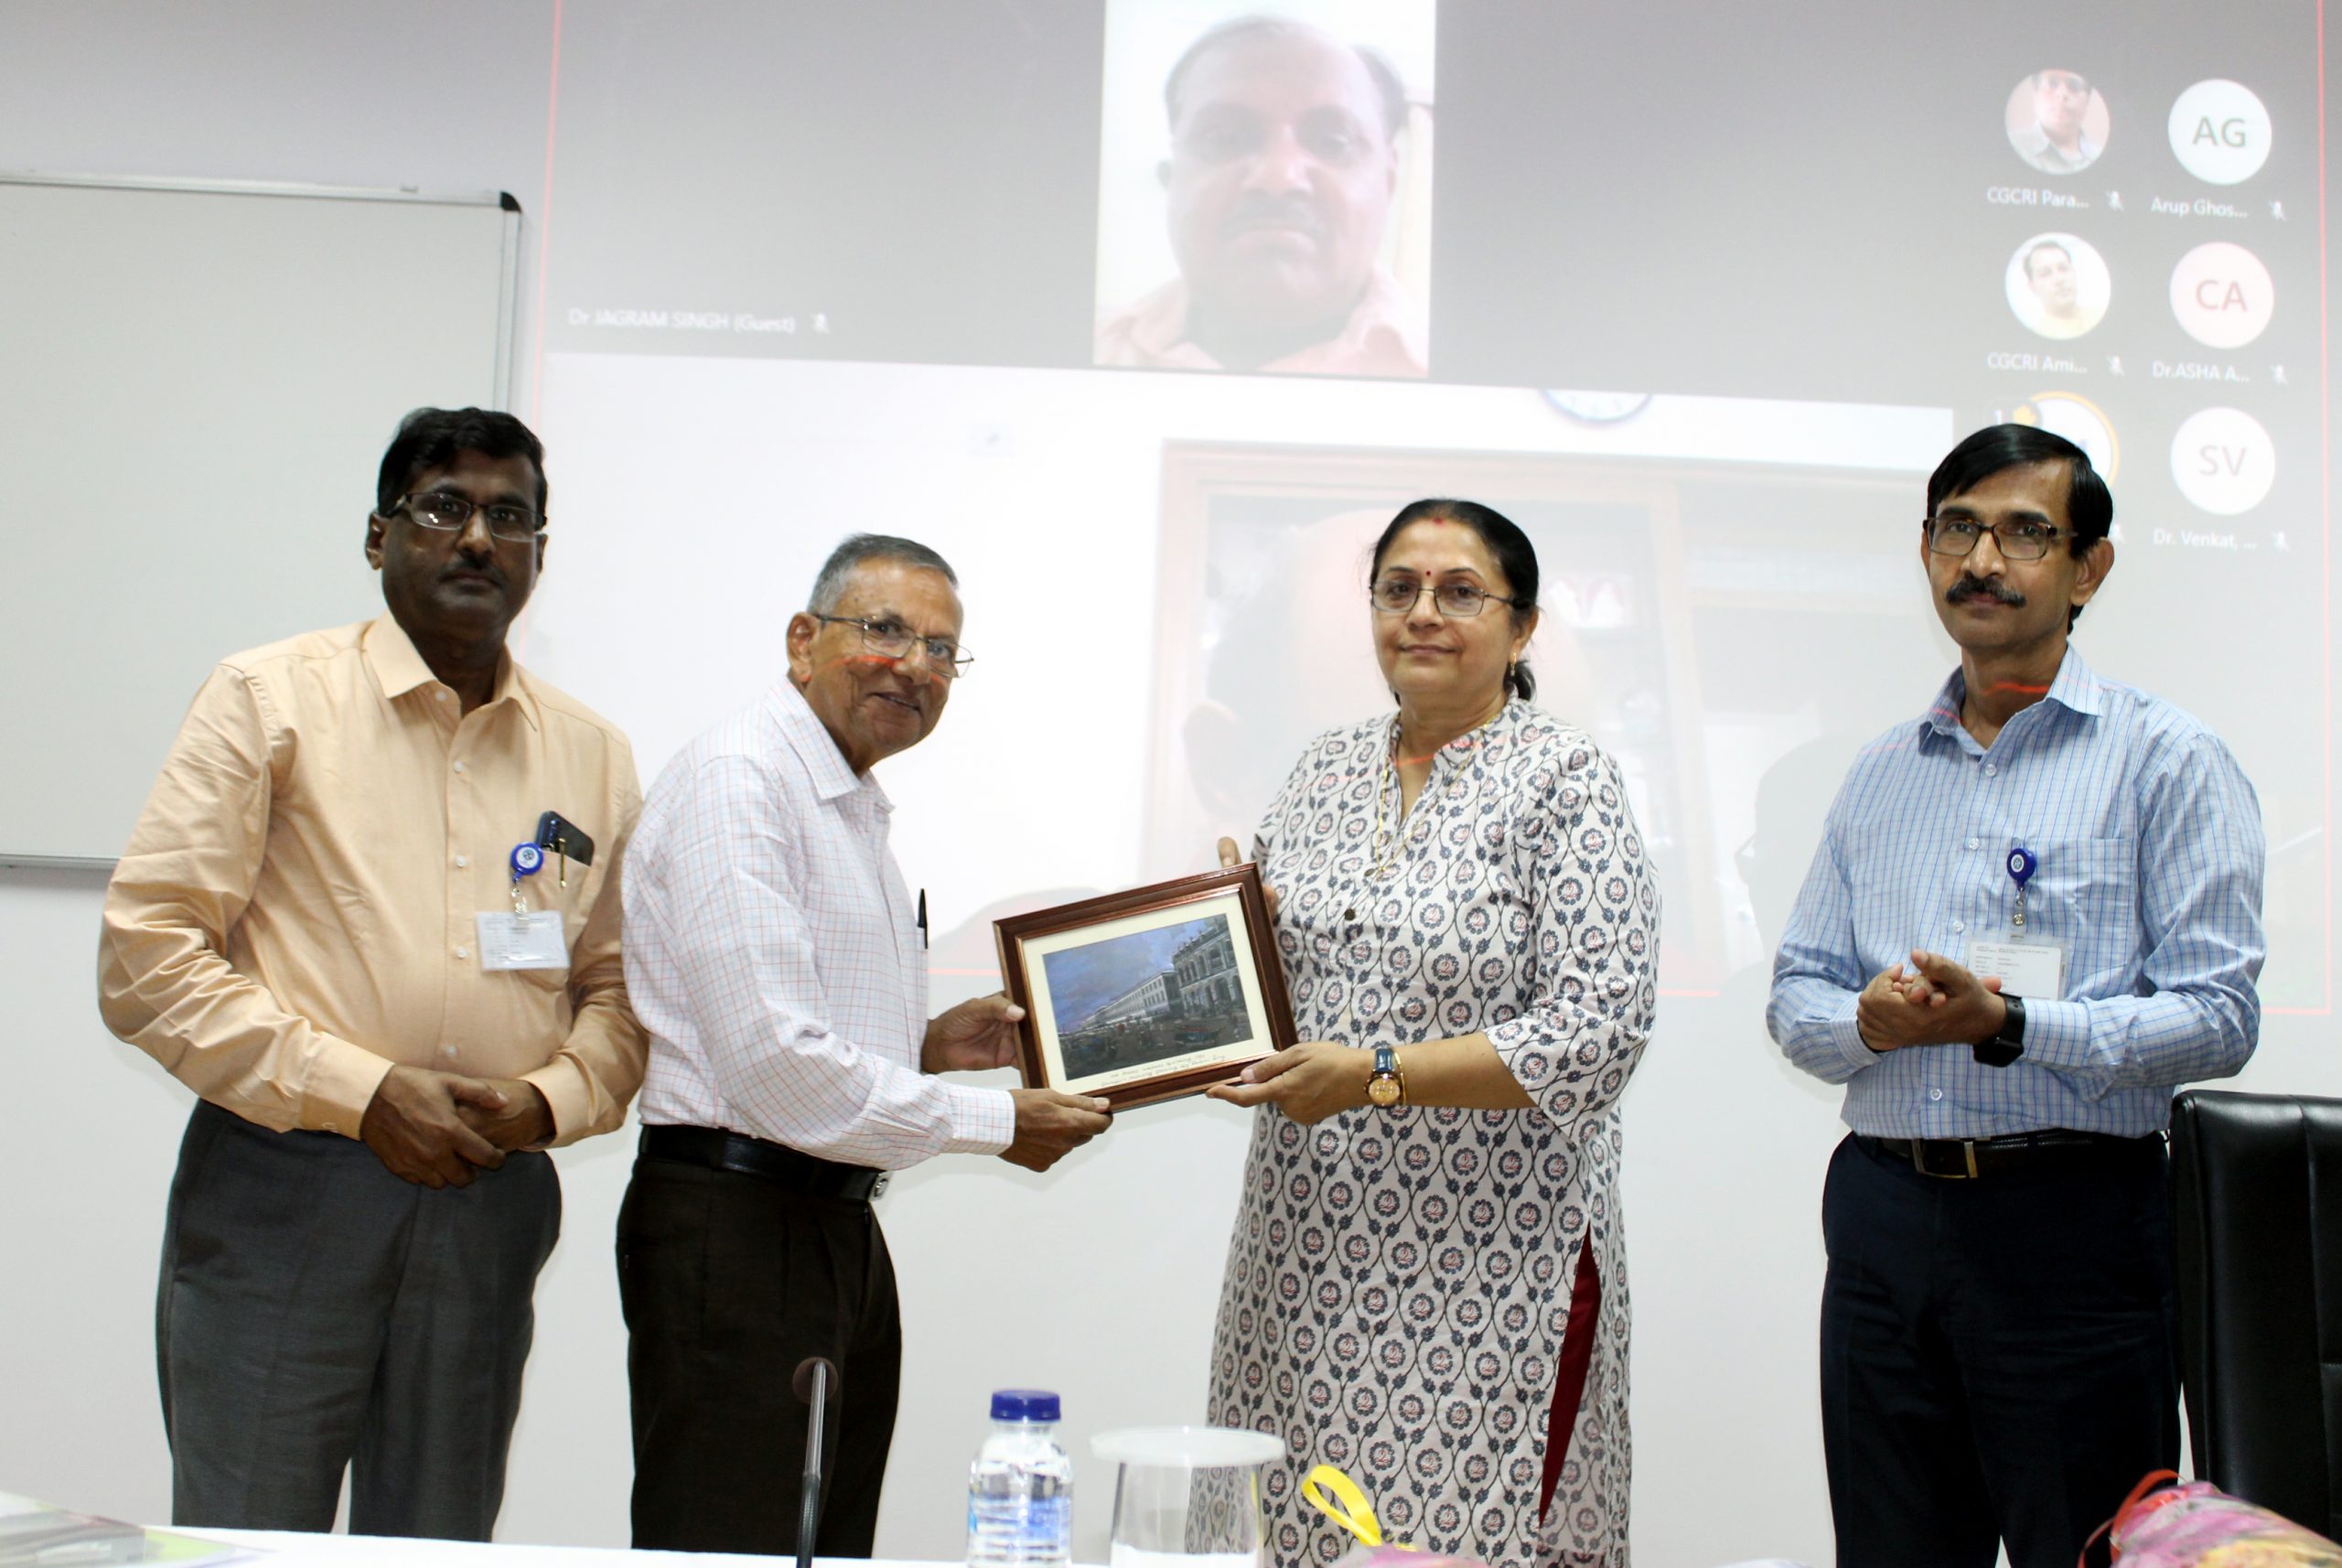 Technical Lecture by Dr K. G. K. Warrier (Former Chief Scientist and Emeritus Scientist, CSIR-NIIST), UGC Adjunct Faculty and Ceramic Consultant. Programme jointly organized by Indian Ceramic Society Kolkata Chapter & CSIR-Central Glass & Ceramic Research Institute